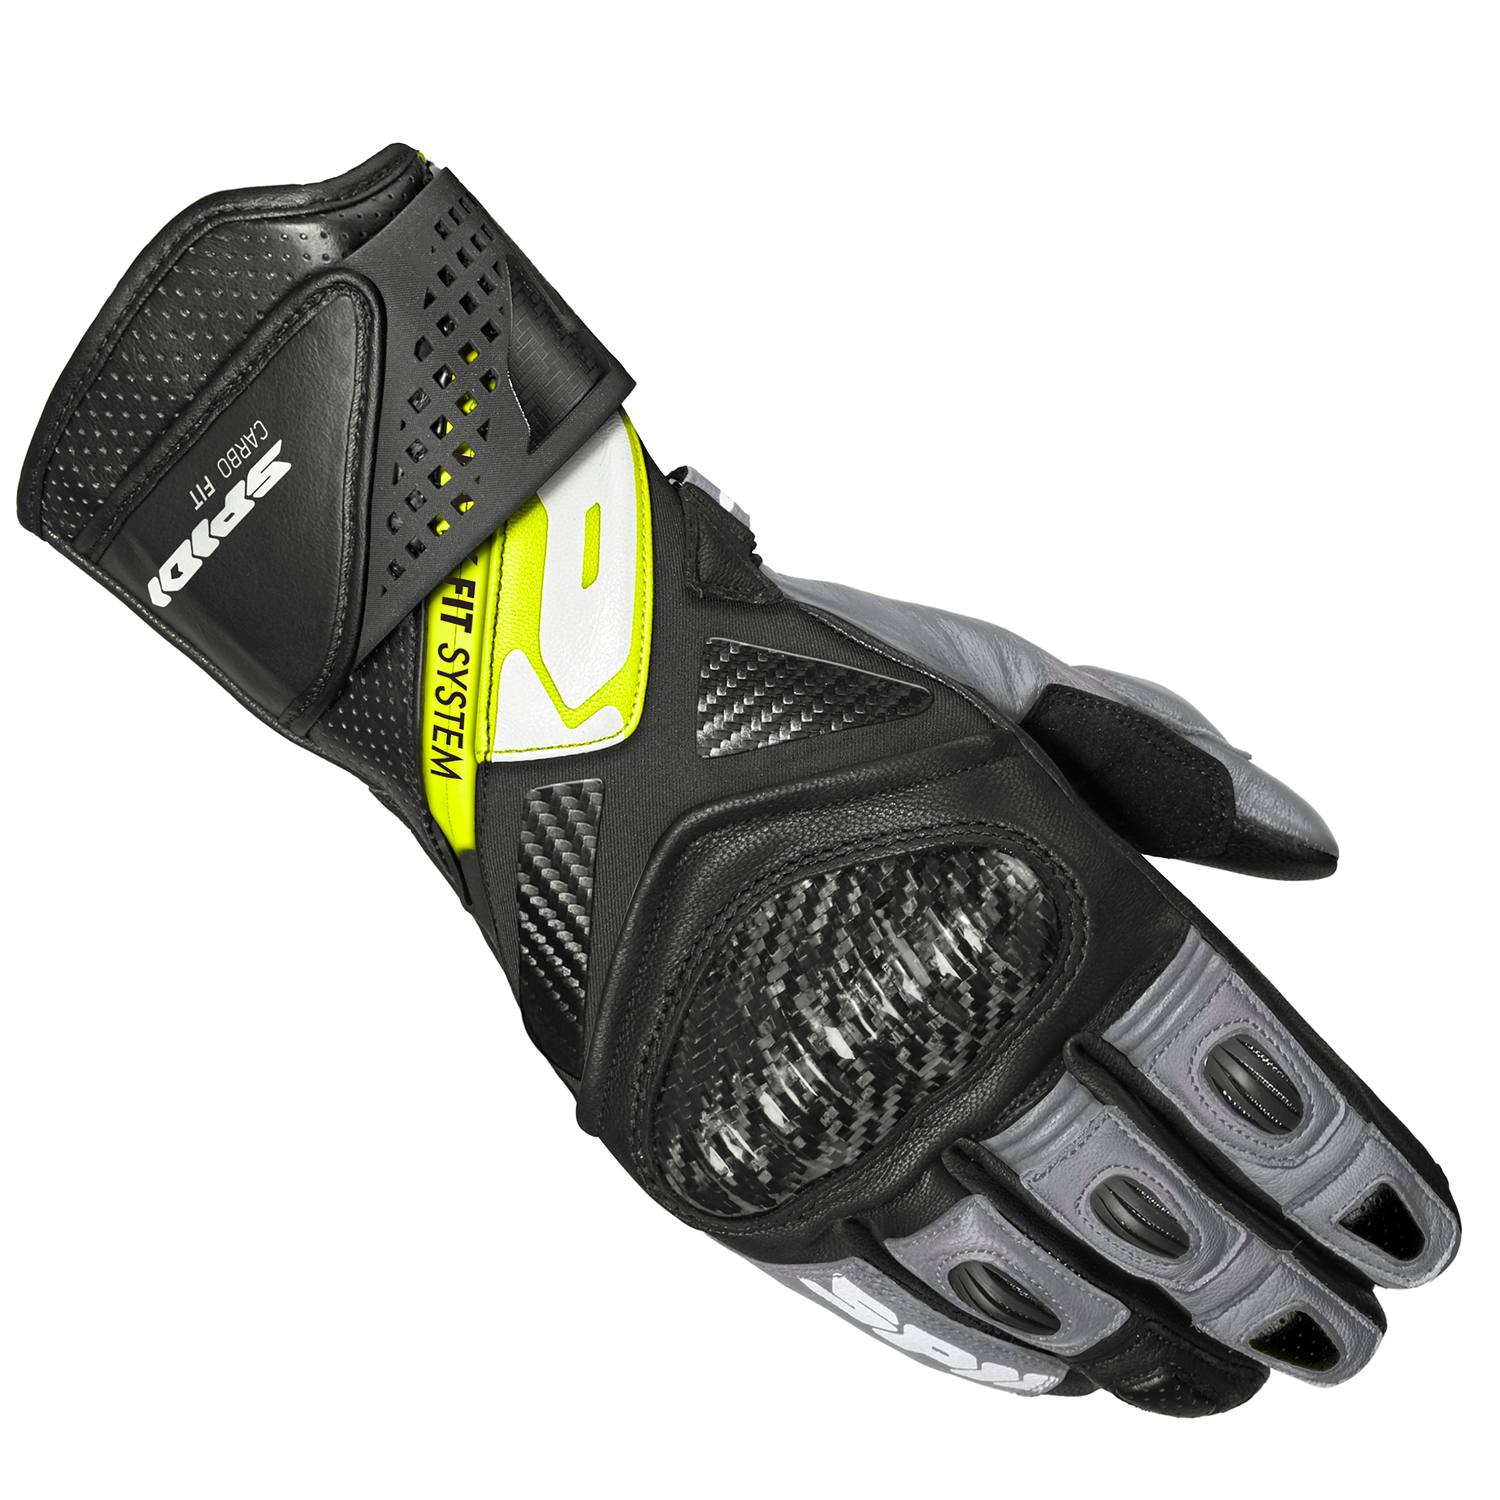 Image of Spidi Carbo Fit Gloves Black Fluorescente Yellow Size XL EN